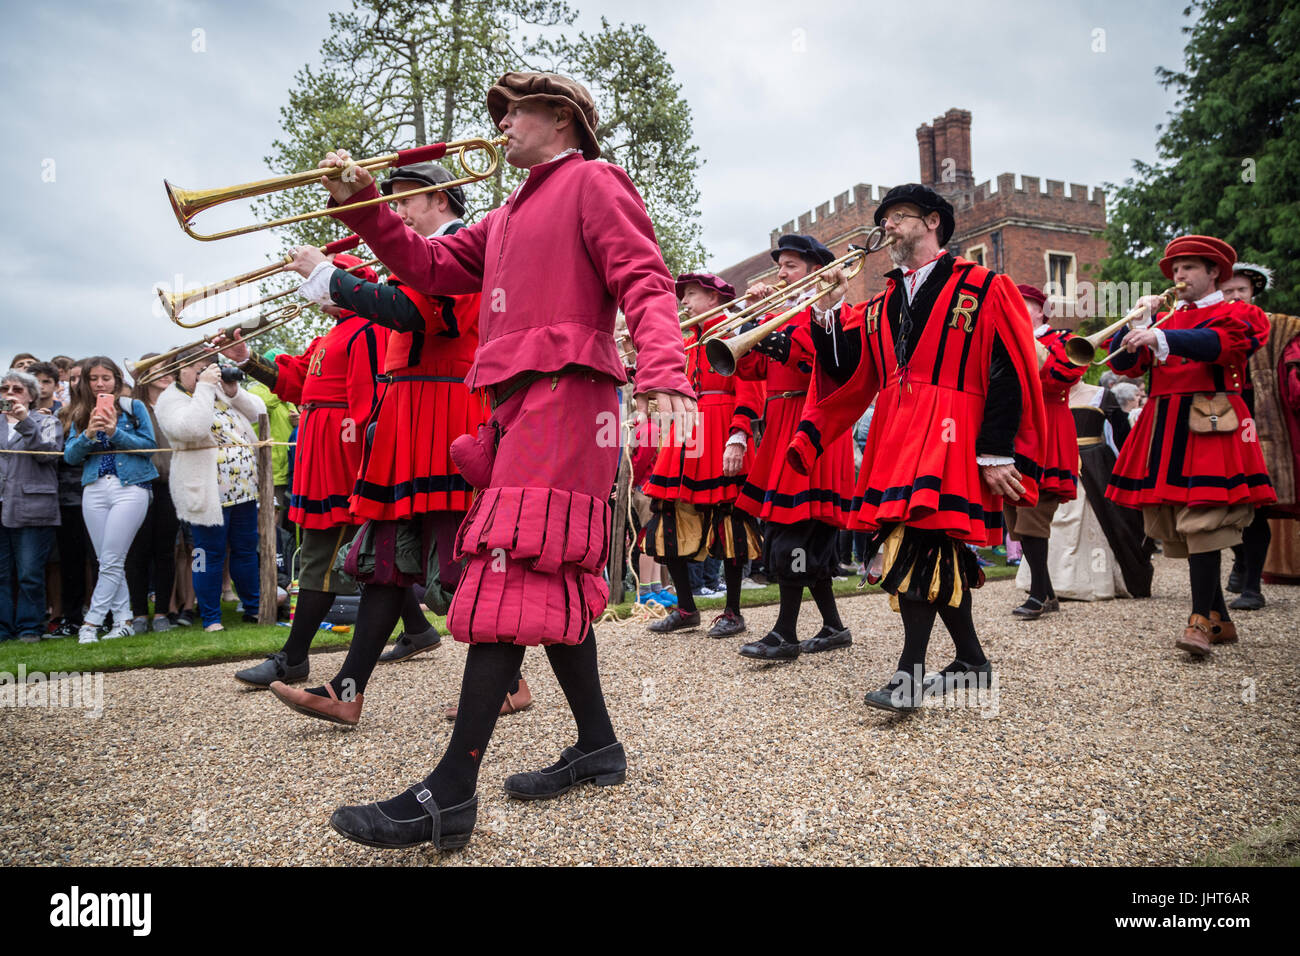 East Molesey, London, UK. 15th July, 2017. Historical re-enactments during the Tudor Joust at Hampton Court Palace © Guy Corbishley/Alamy Live News Stock Photo